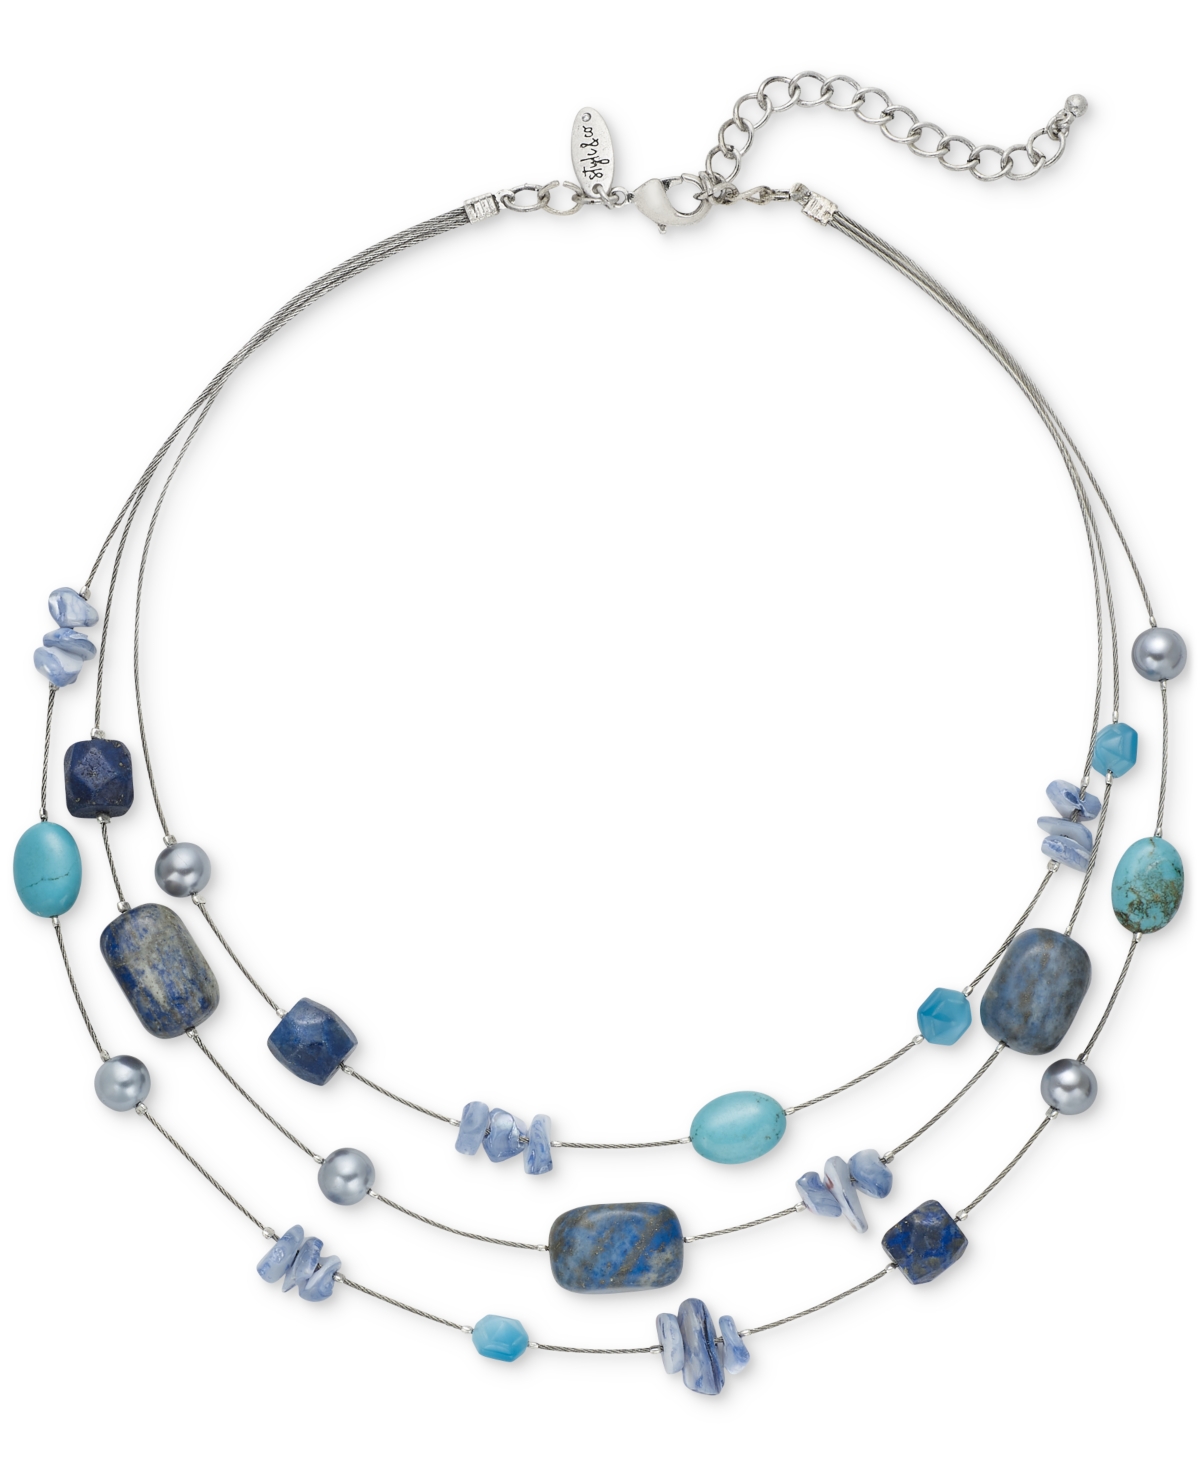 Layered Stone Statement Necklace, 20" + 3" extender, Created for Macy's - Blue